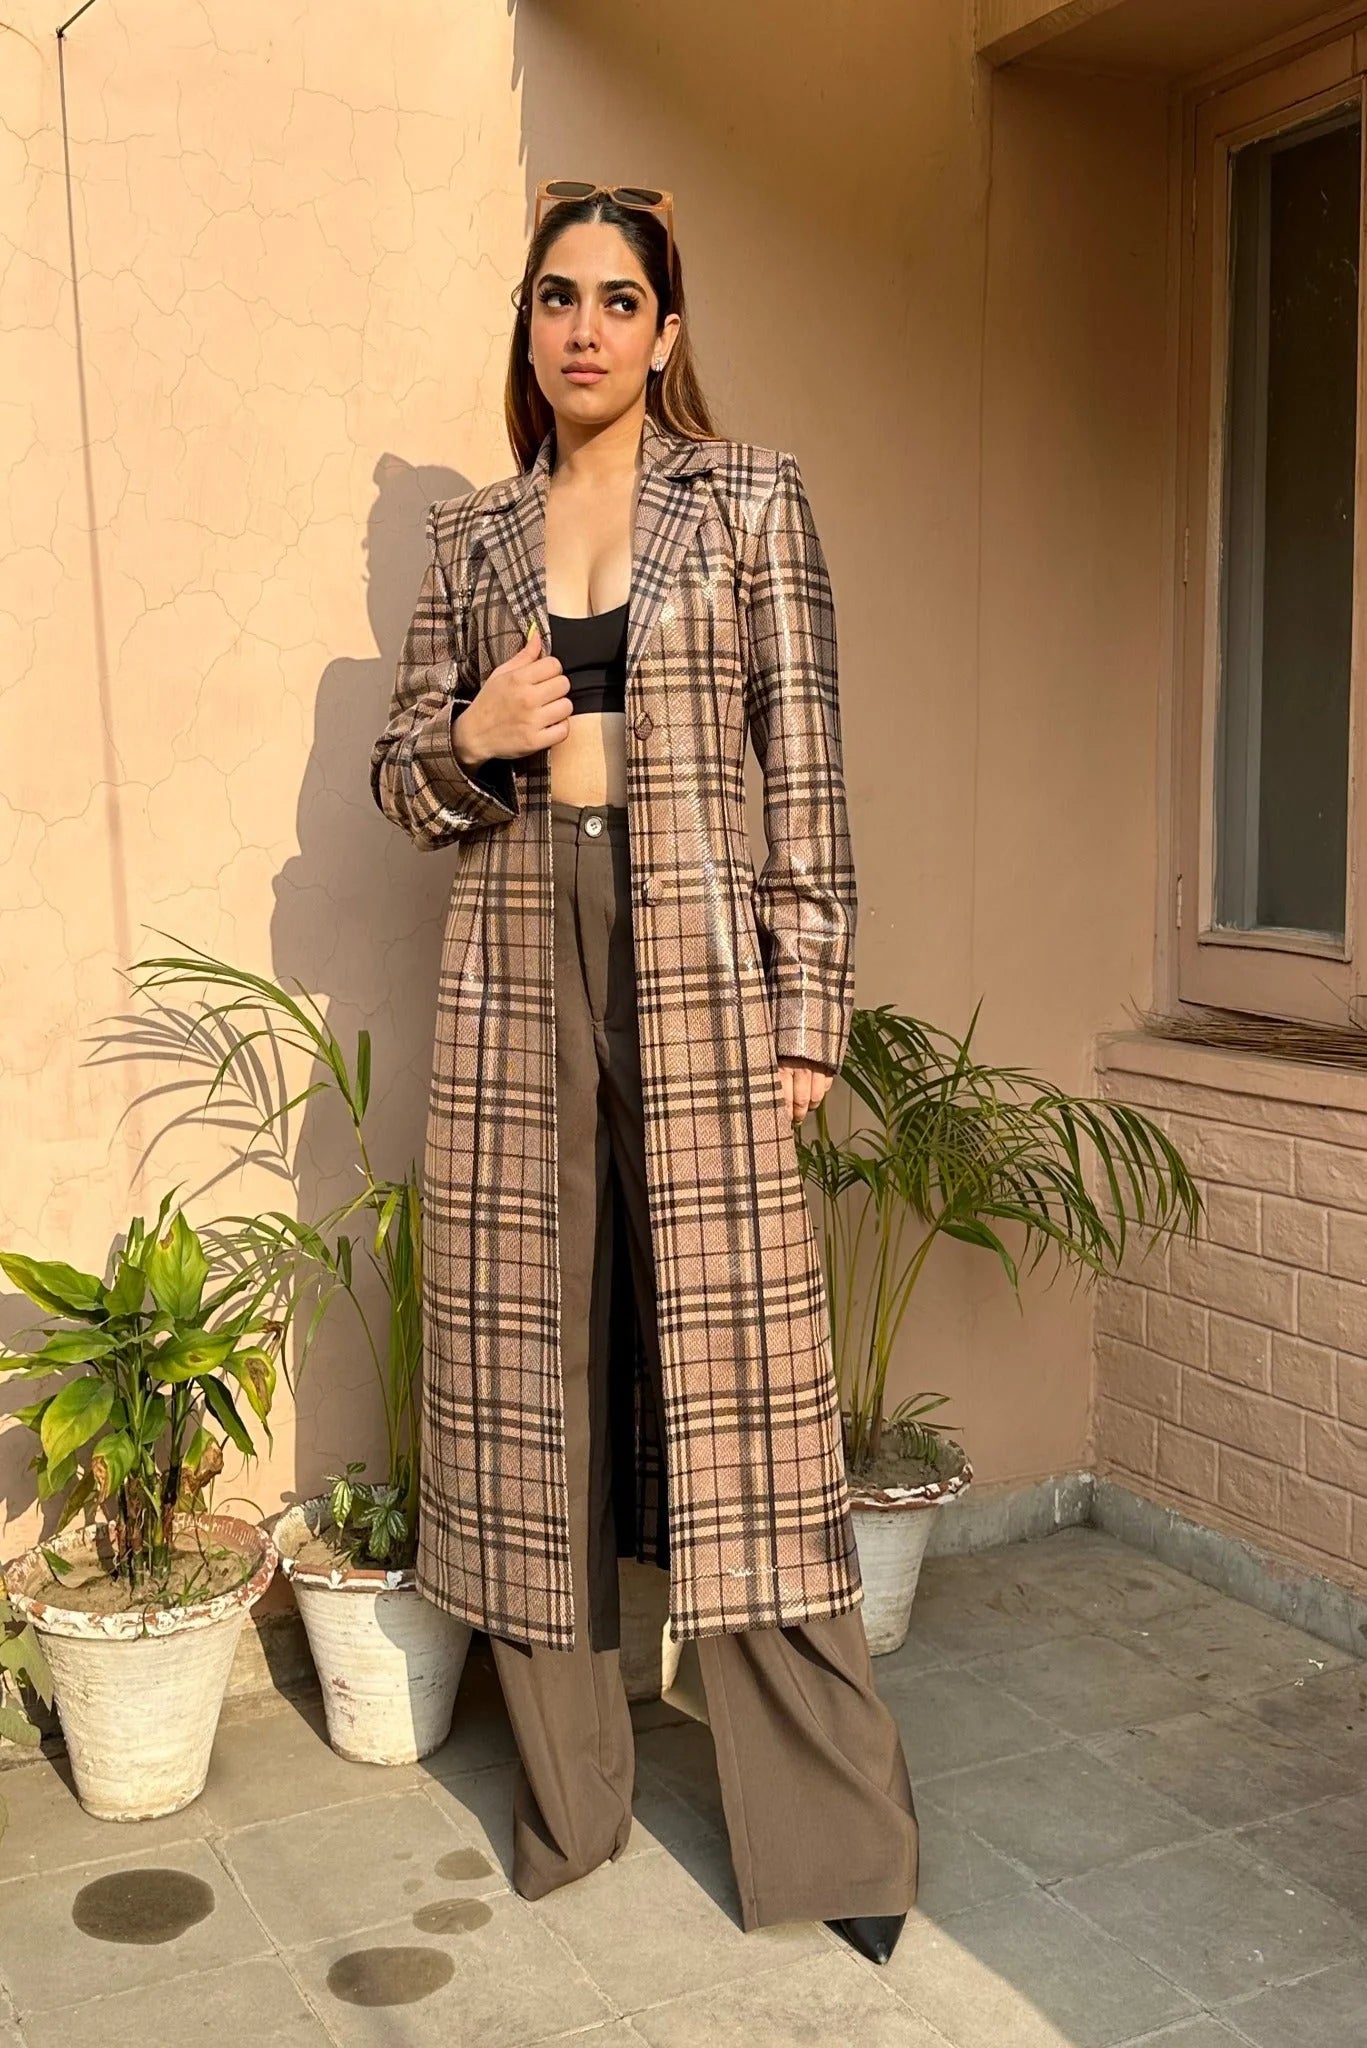 Stylish Long Coats for Women - Winter, Wool & Leather Trends